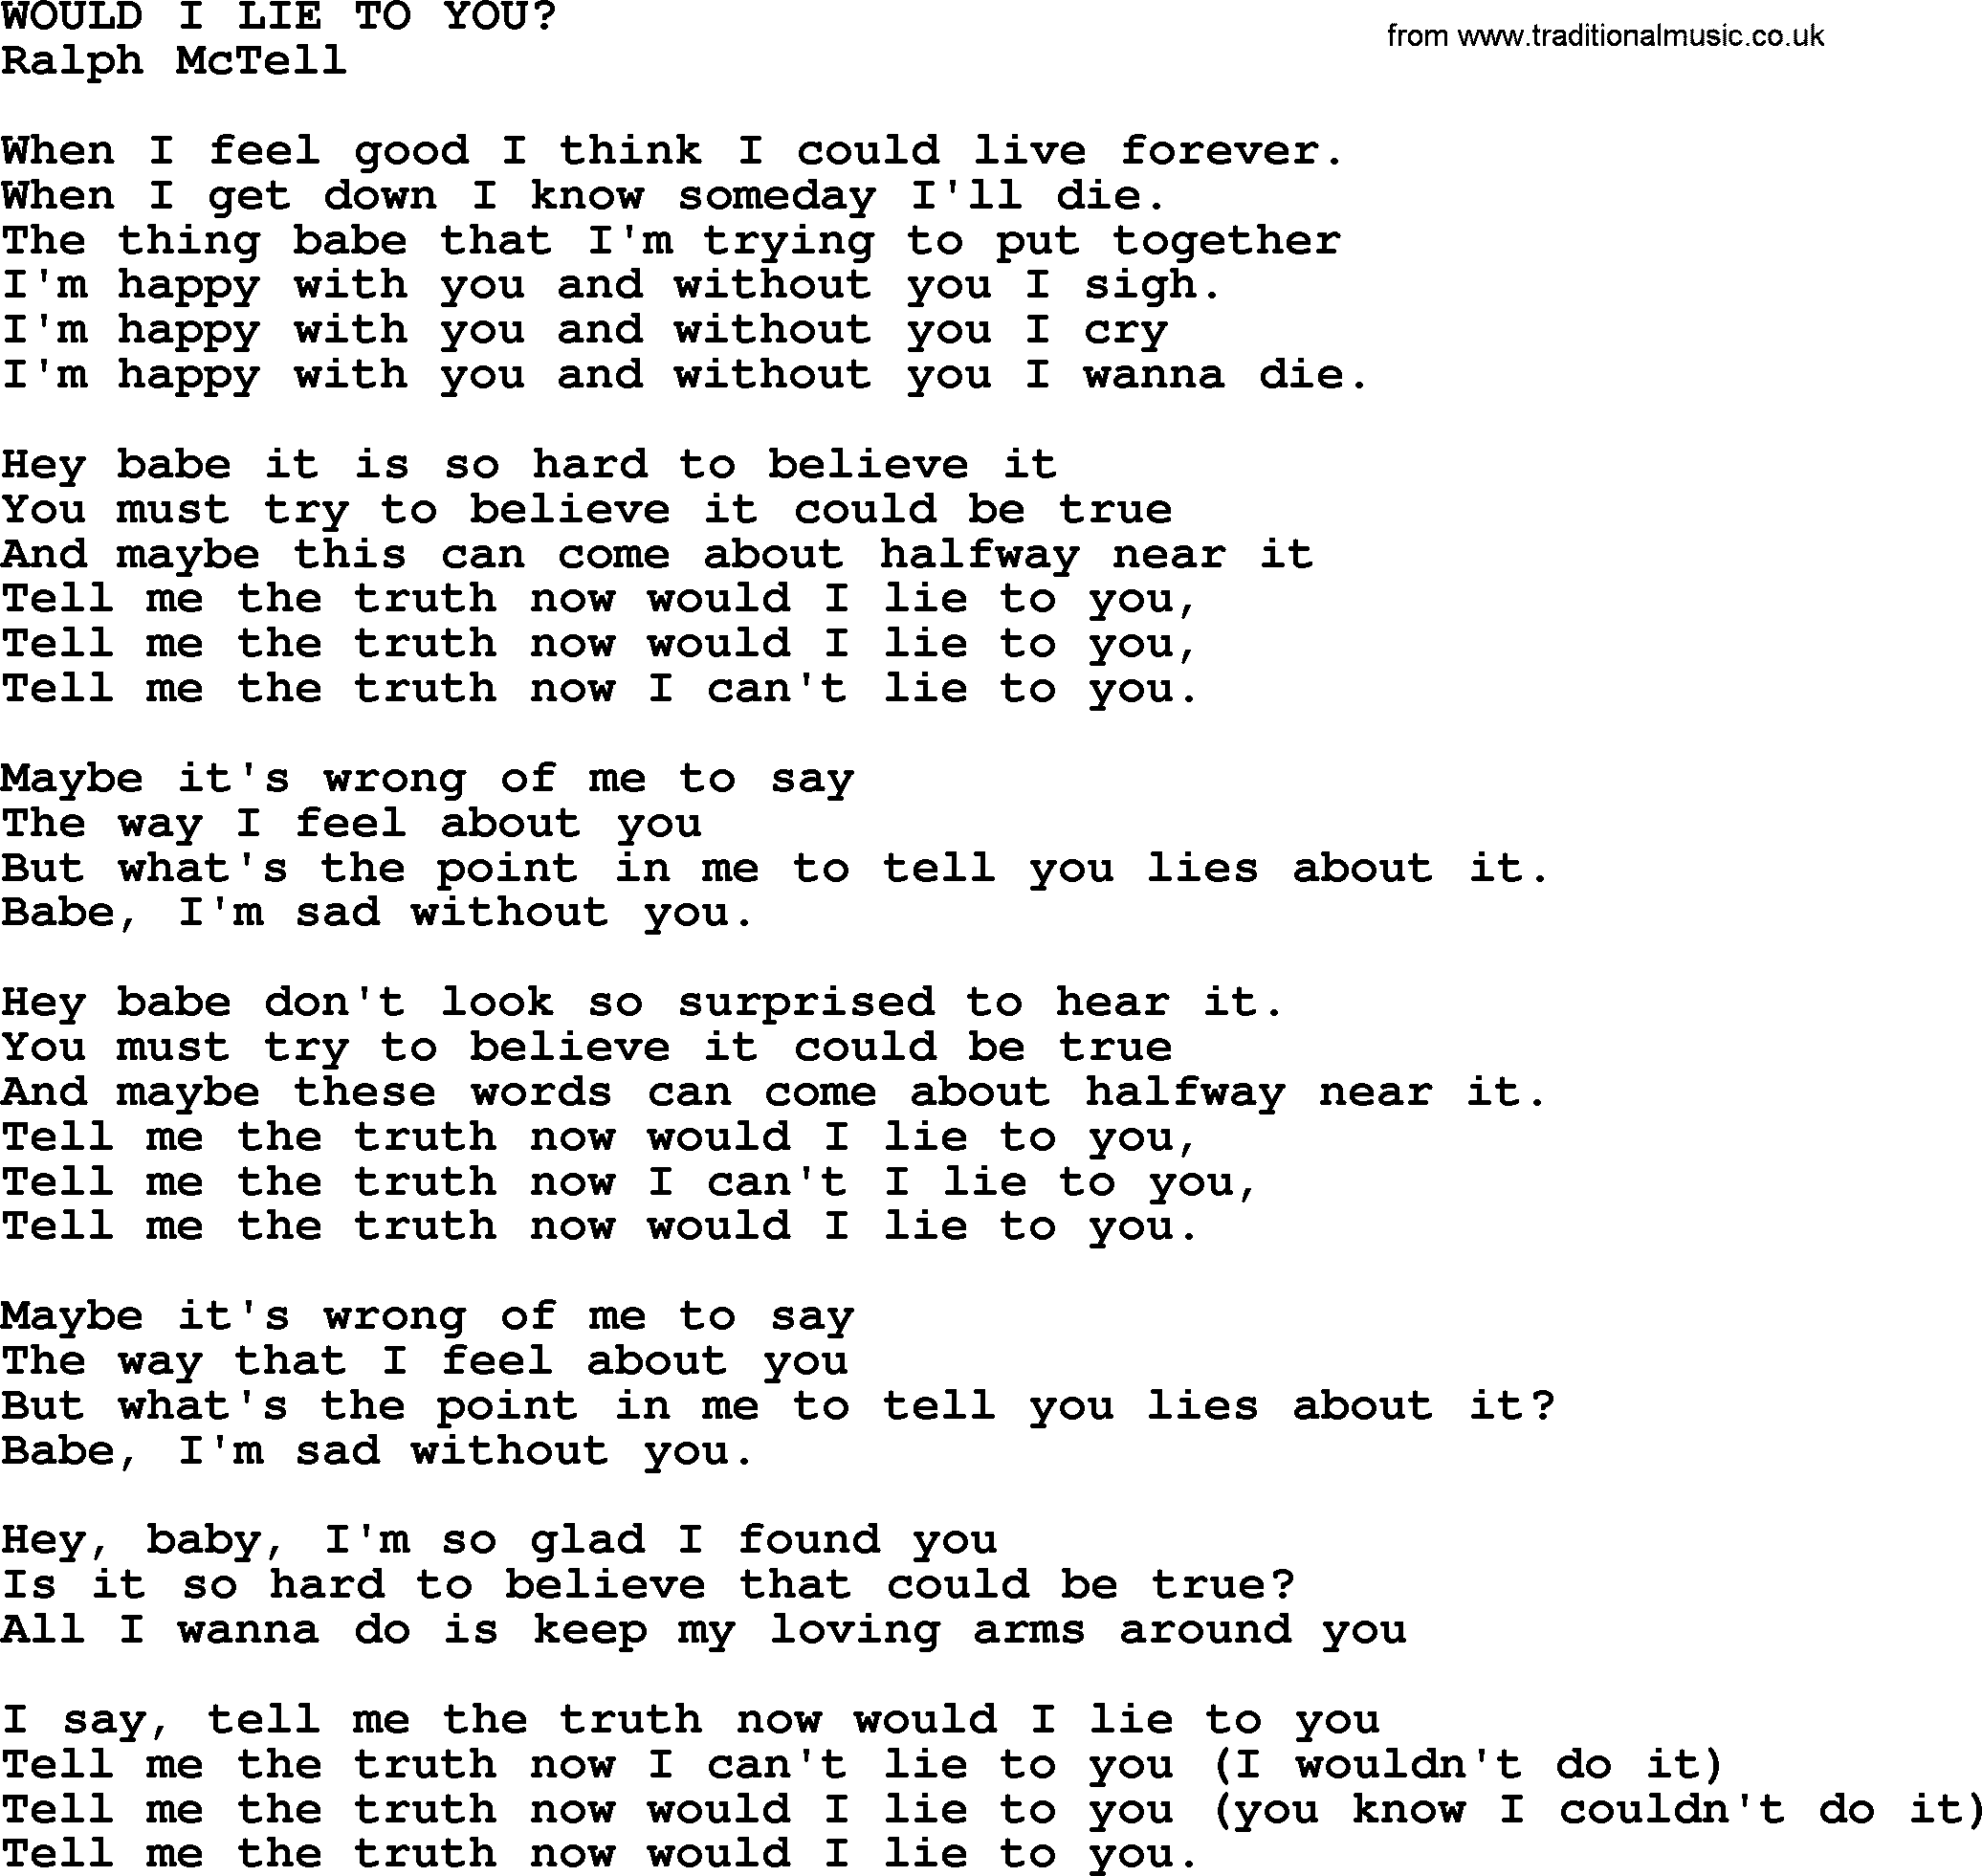 Would I Lie To You.txt - by Ralph McTell lyrics and chords